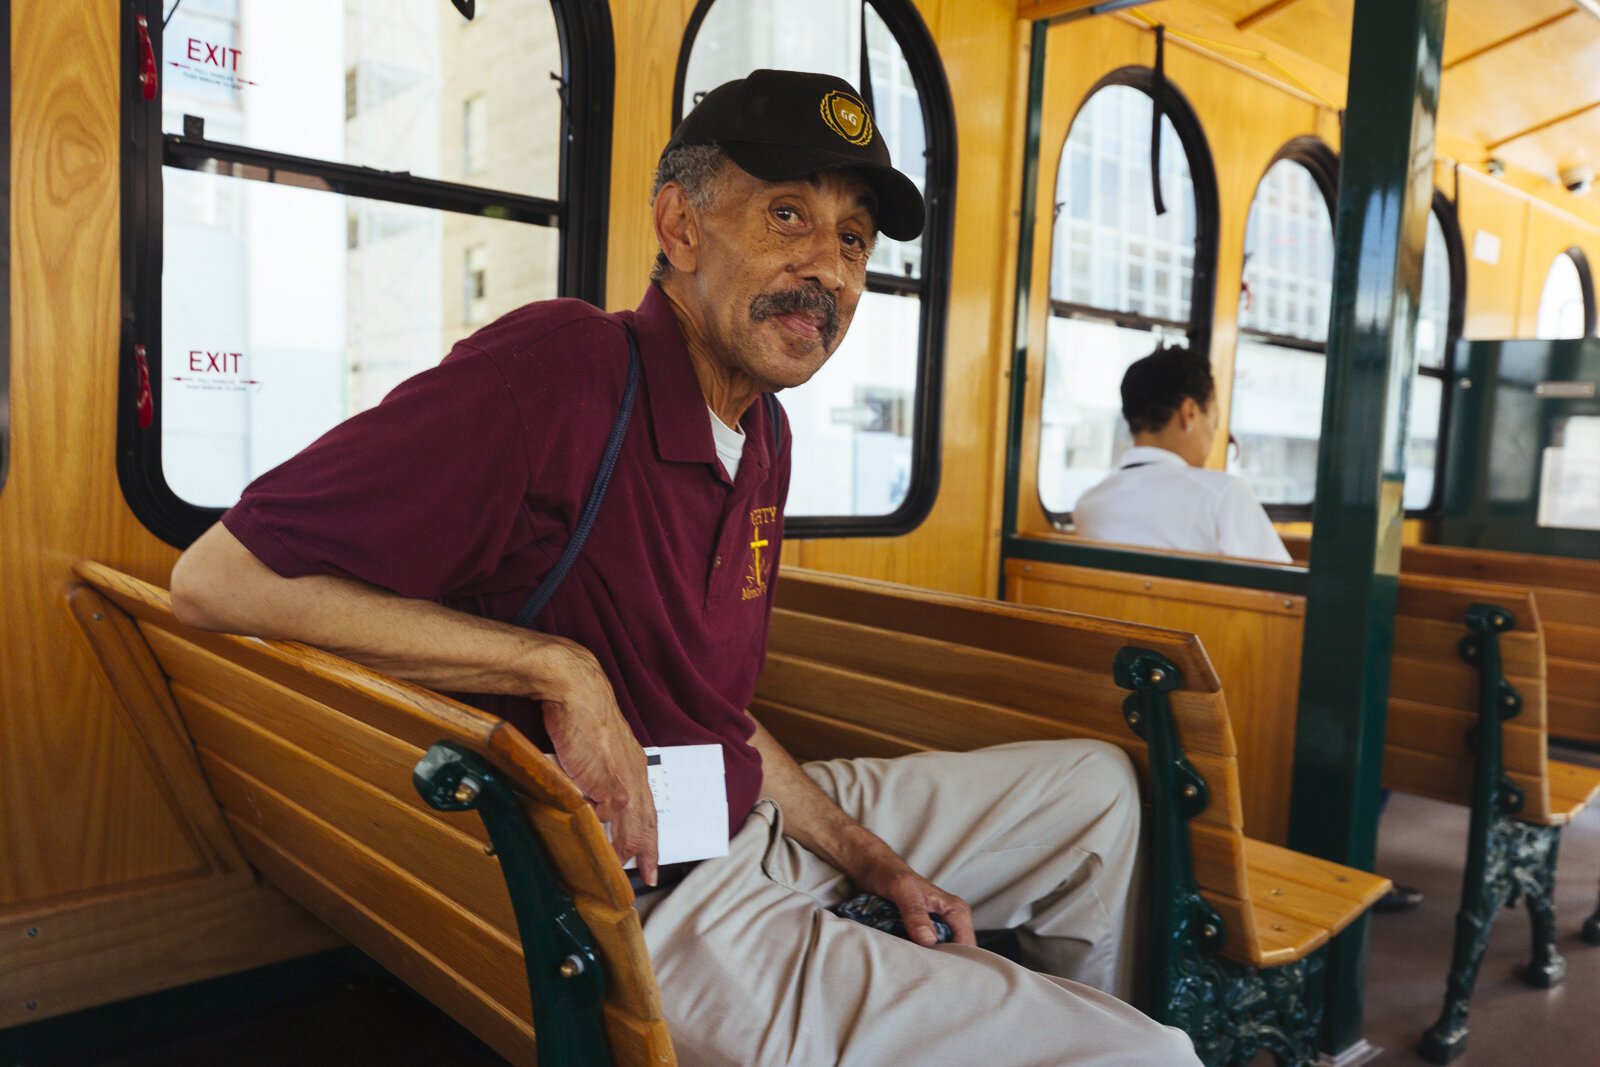 Archie Willis rides the Madison Avenue trolley bus through Madison Heights. (Ziggy Mack)